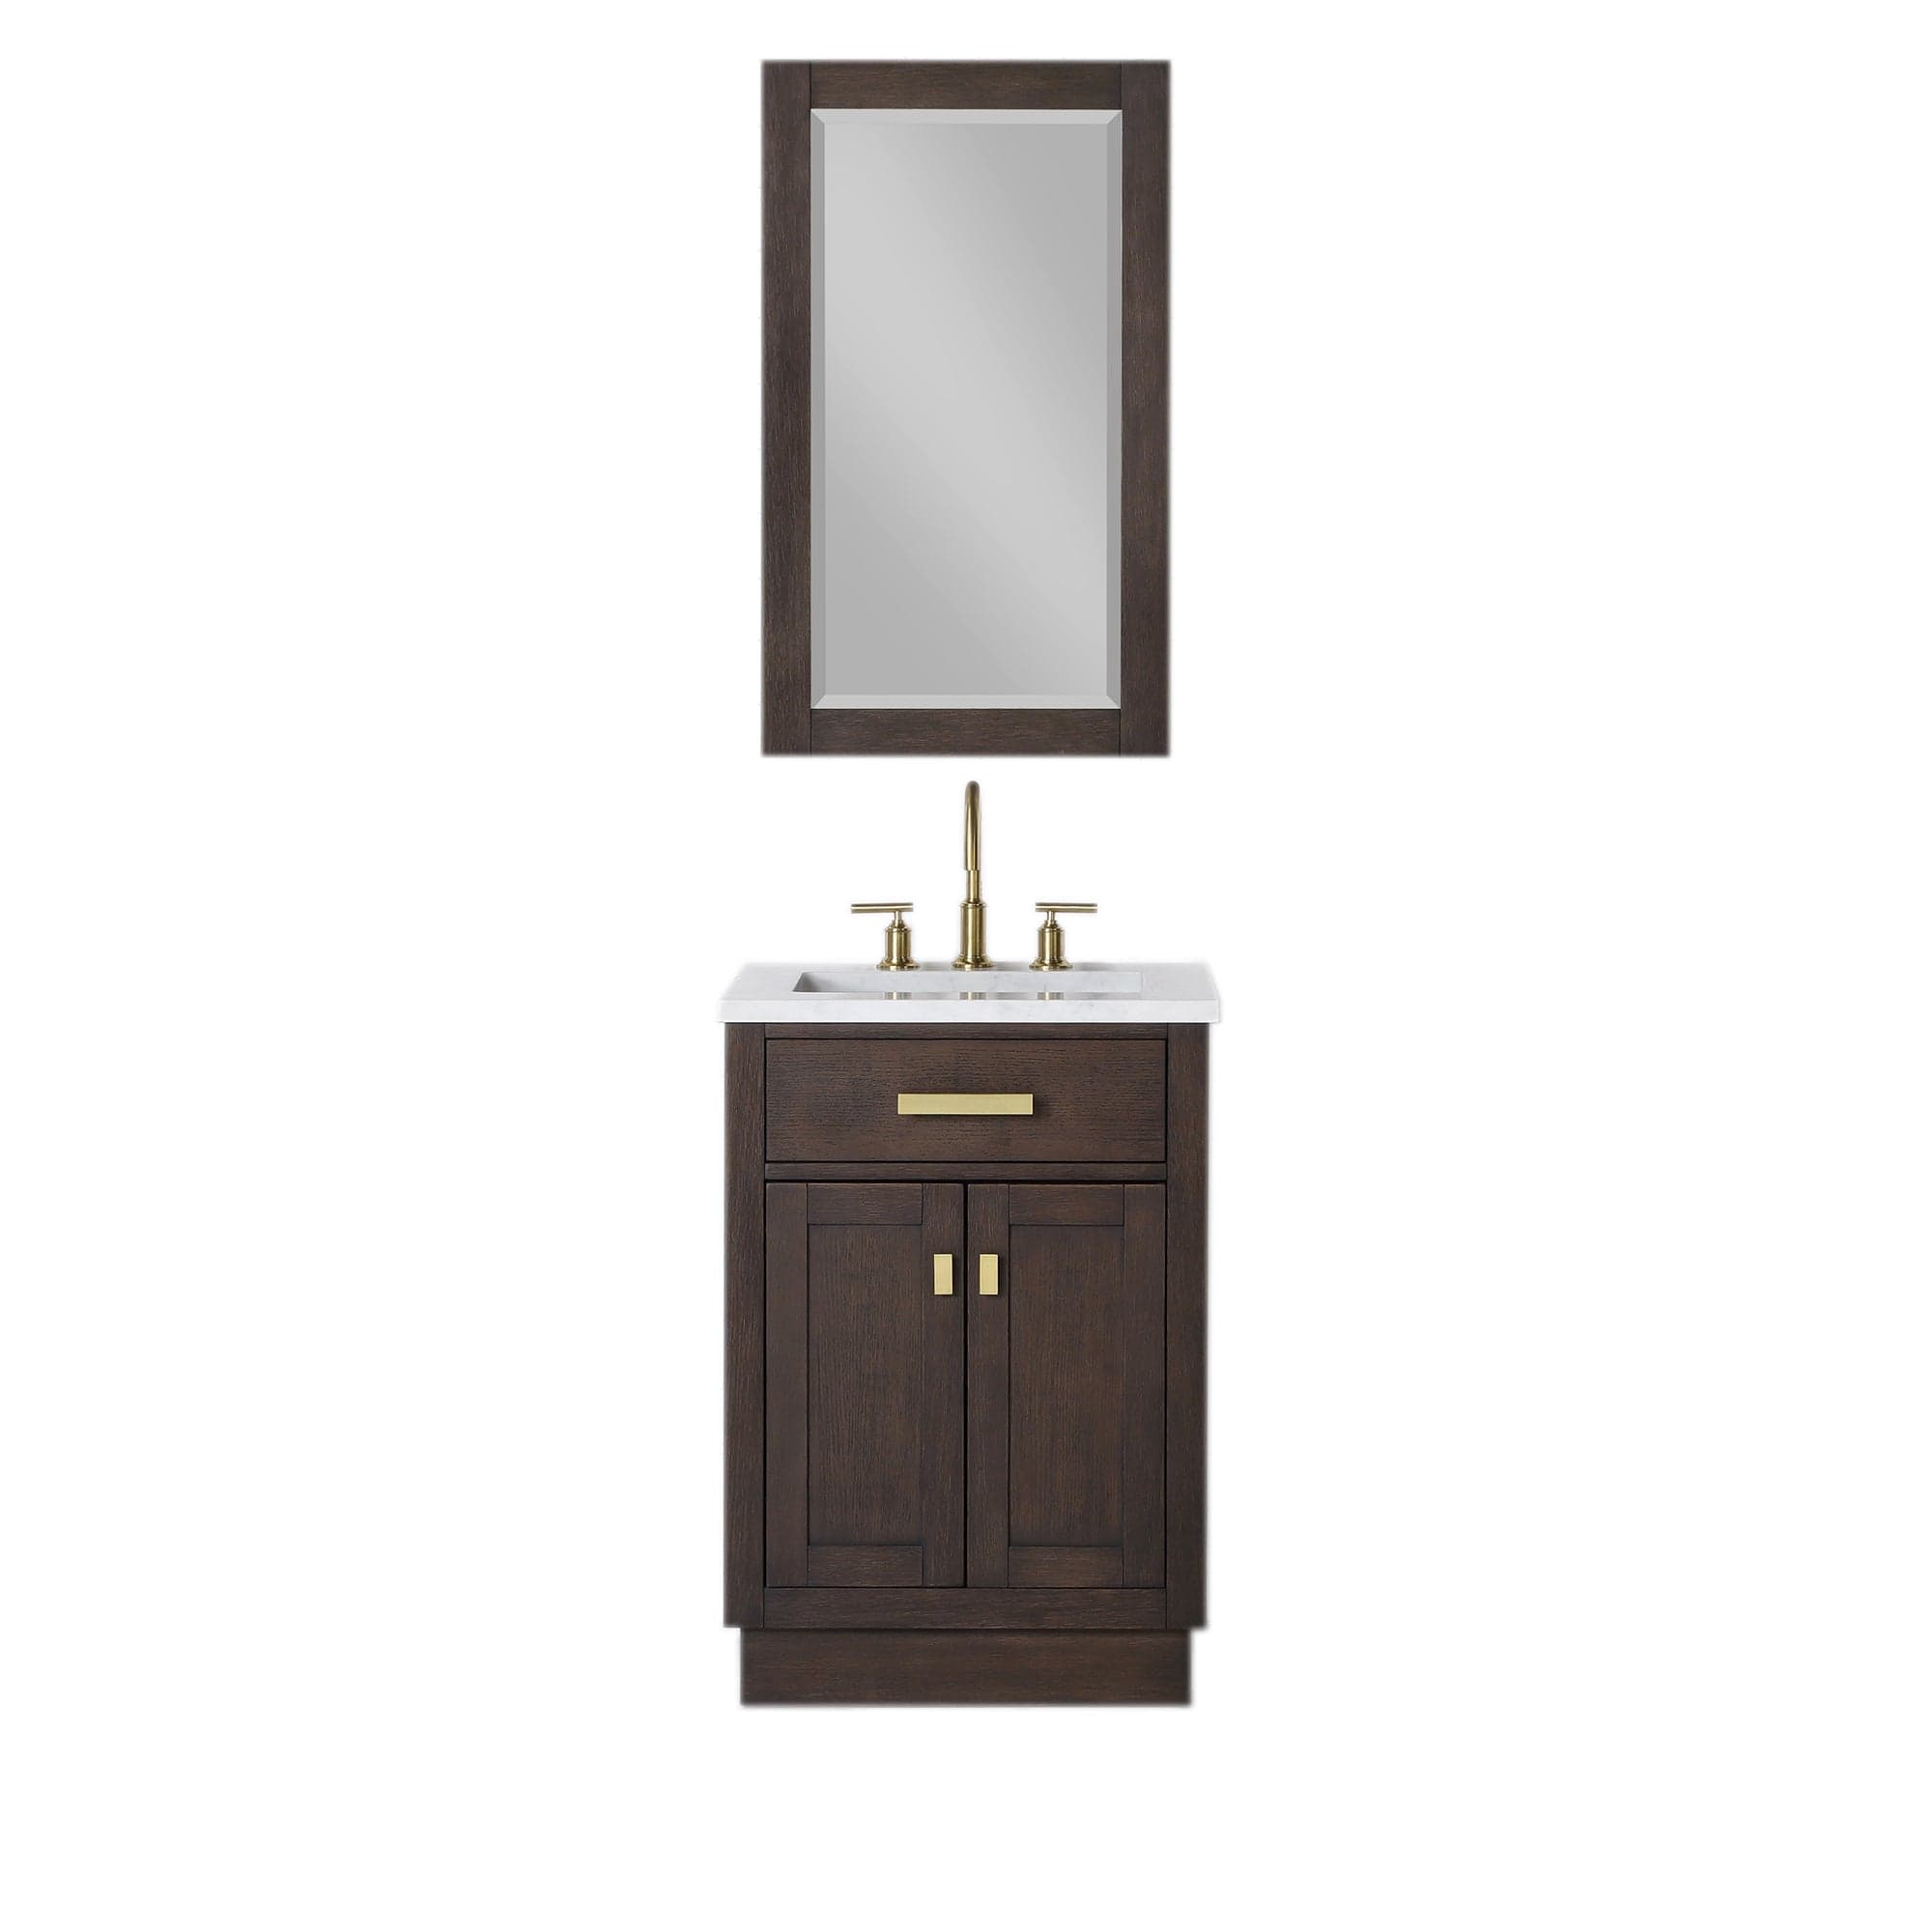 Chestnut 24 In. Single Sink Carrara White Marble Countertop Vanity In Brown Oak with Grooseneck Faucet and Mirror - Molaix732030764606CH24CW06BK-R21BL1406